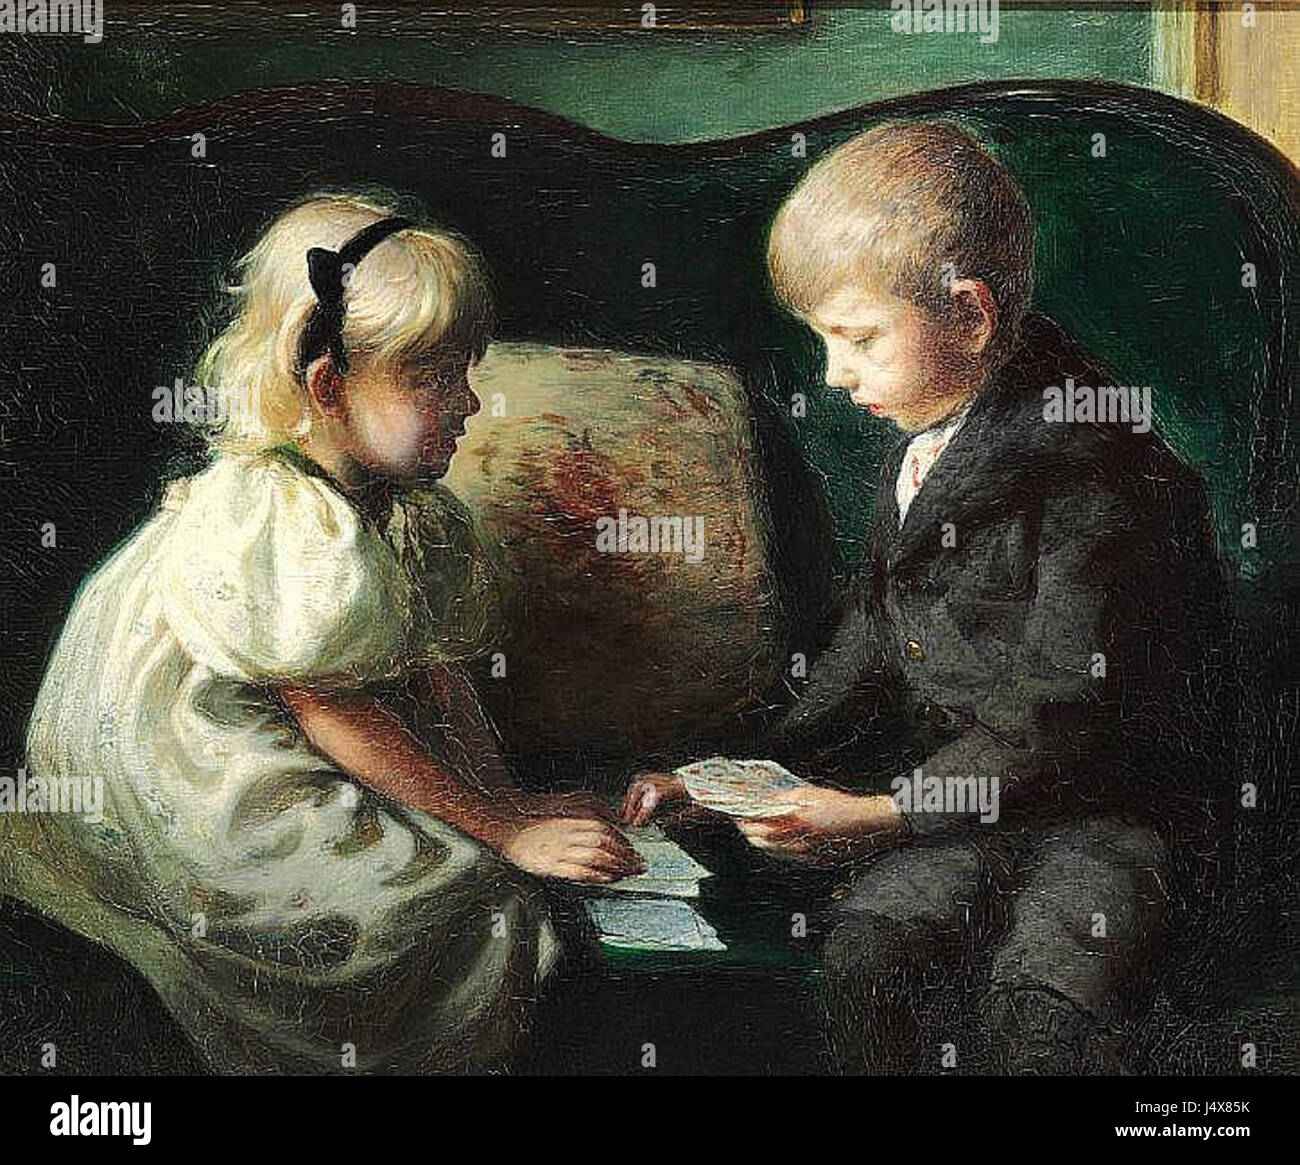 The silversmith and toy designer Kay Bojesen as a child playing cards with his sister Thyra Stock Photo